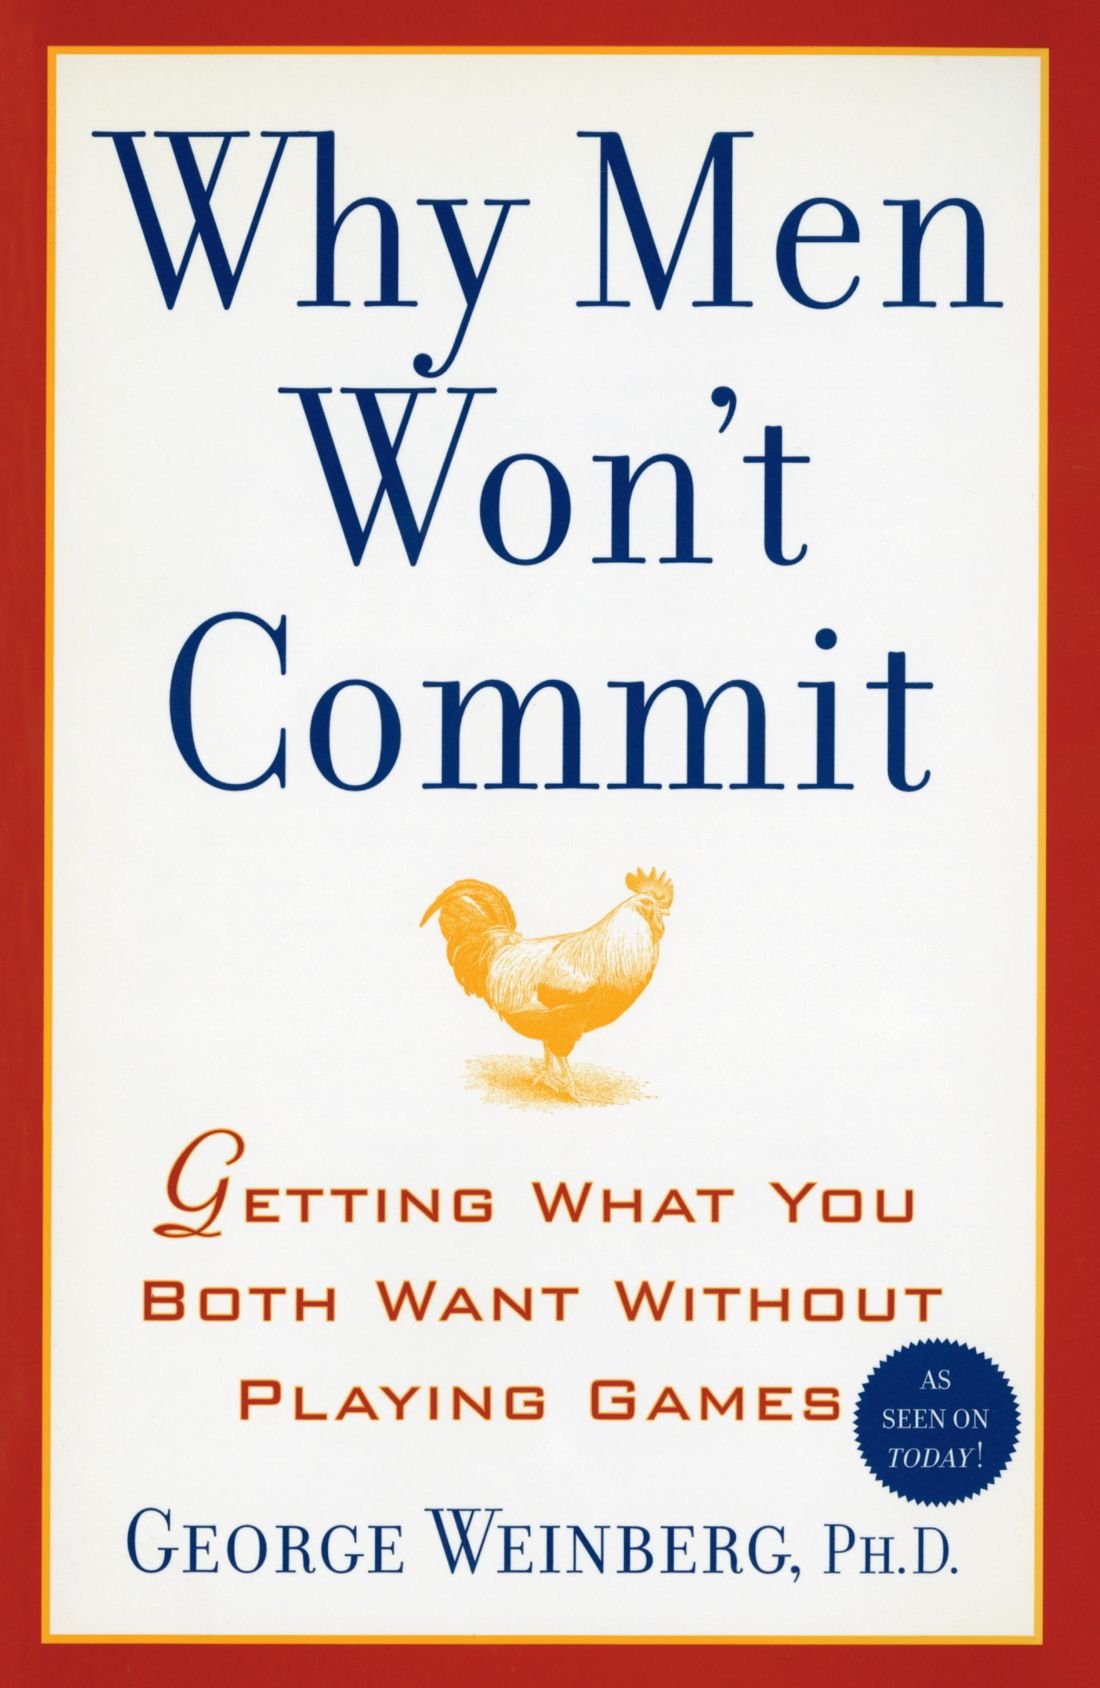 Why Men Won't Commit: Getting what you Both Want Without Playing Games. New York: Atria Books, 2003.